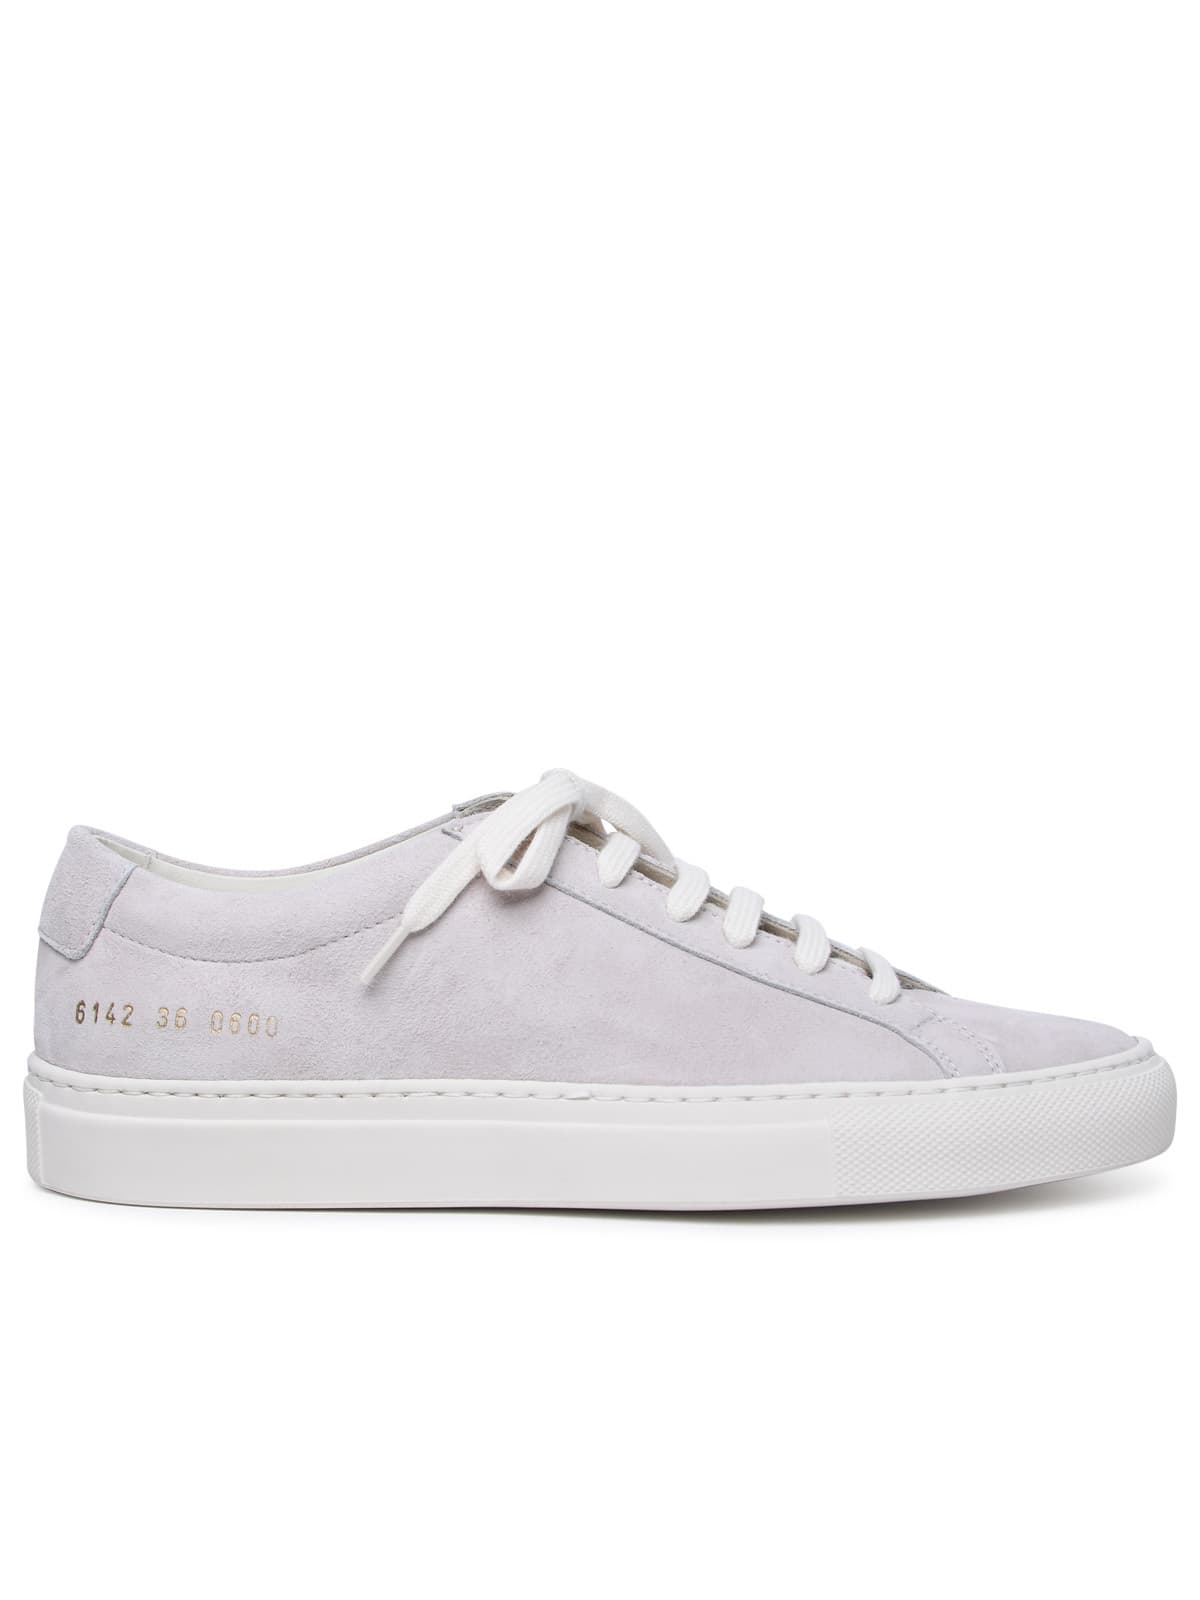 Shop Common Projects Contrast Achilles Suede Nude Sneakers In Pink